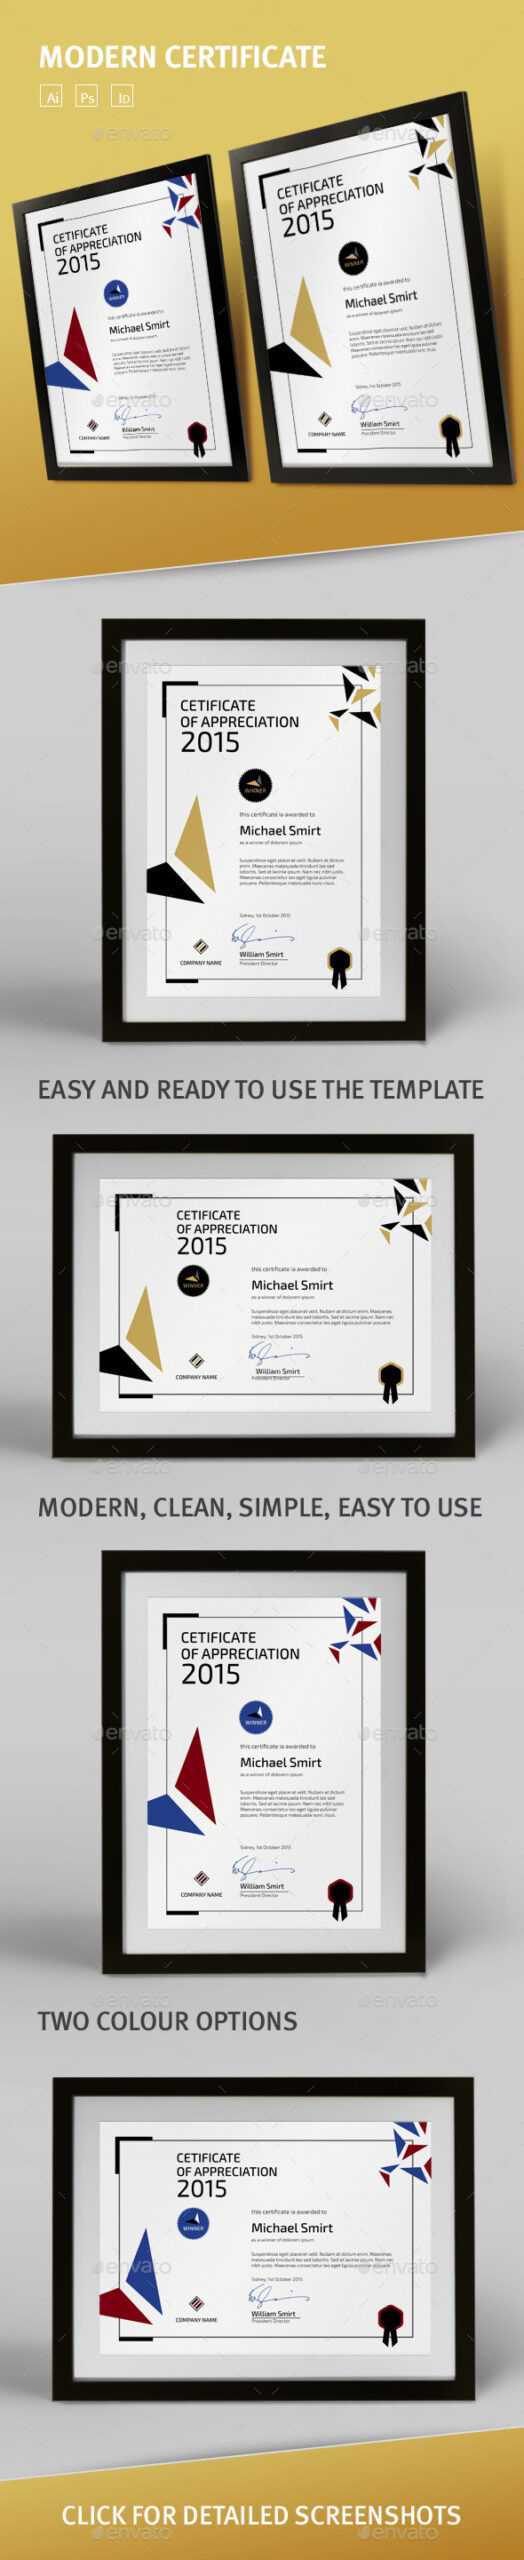 Certificate Graphics, Designs & Templates From Graphicriver Inside Update Certificates That Use Certificate Templates